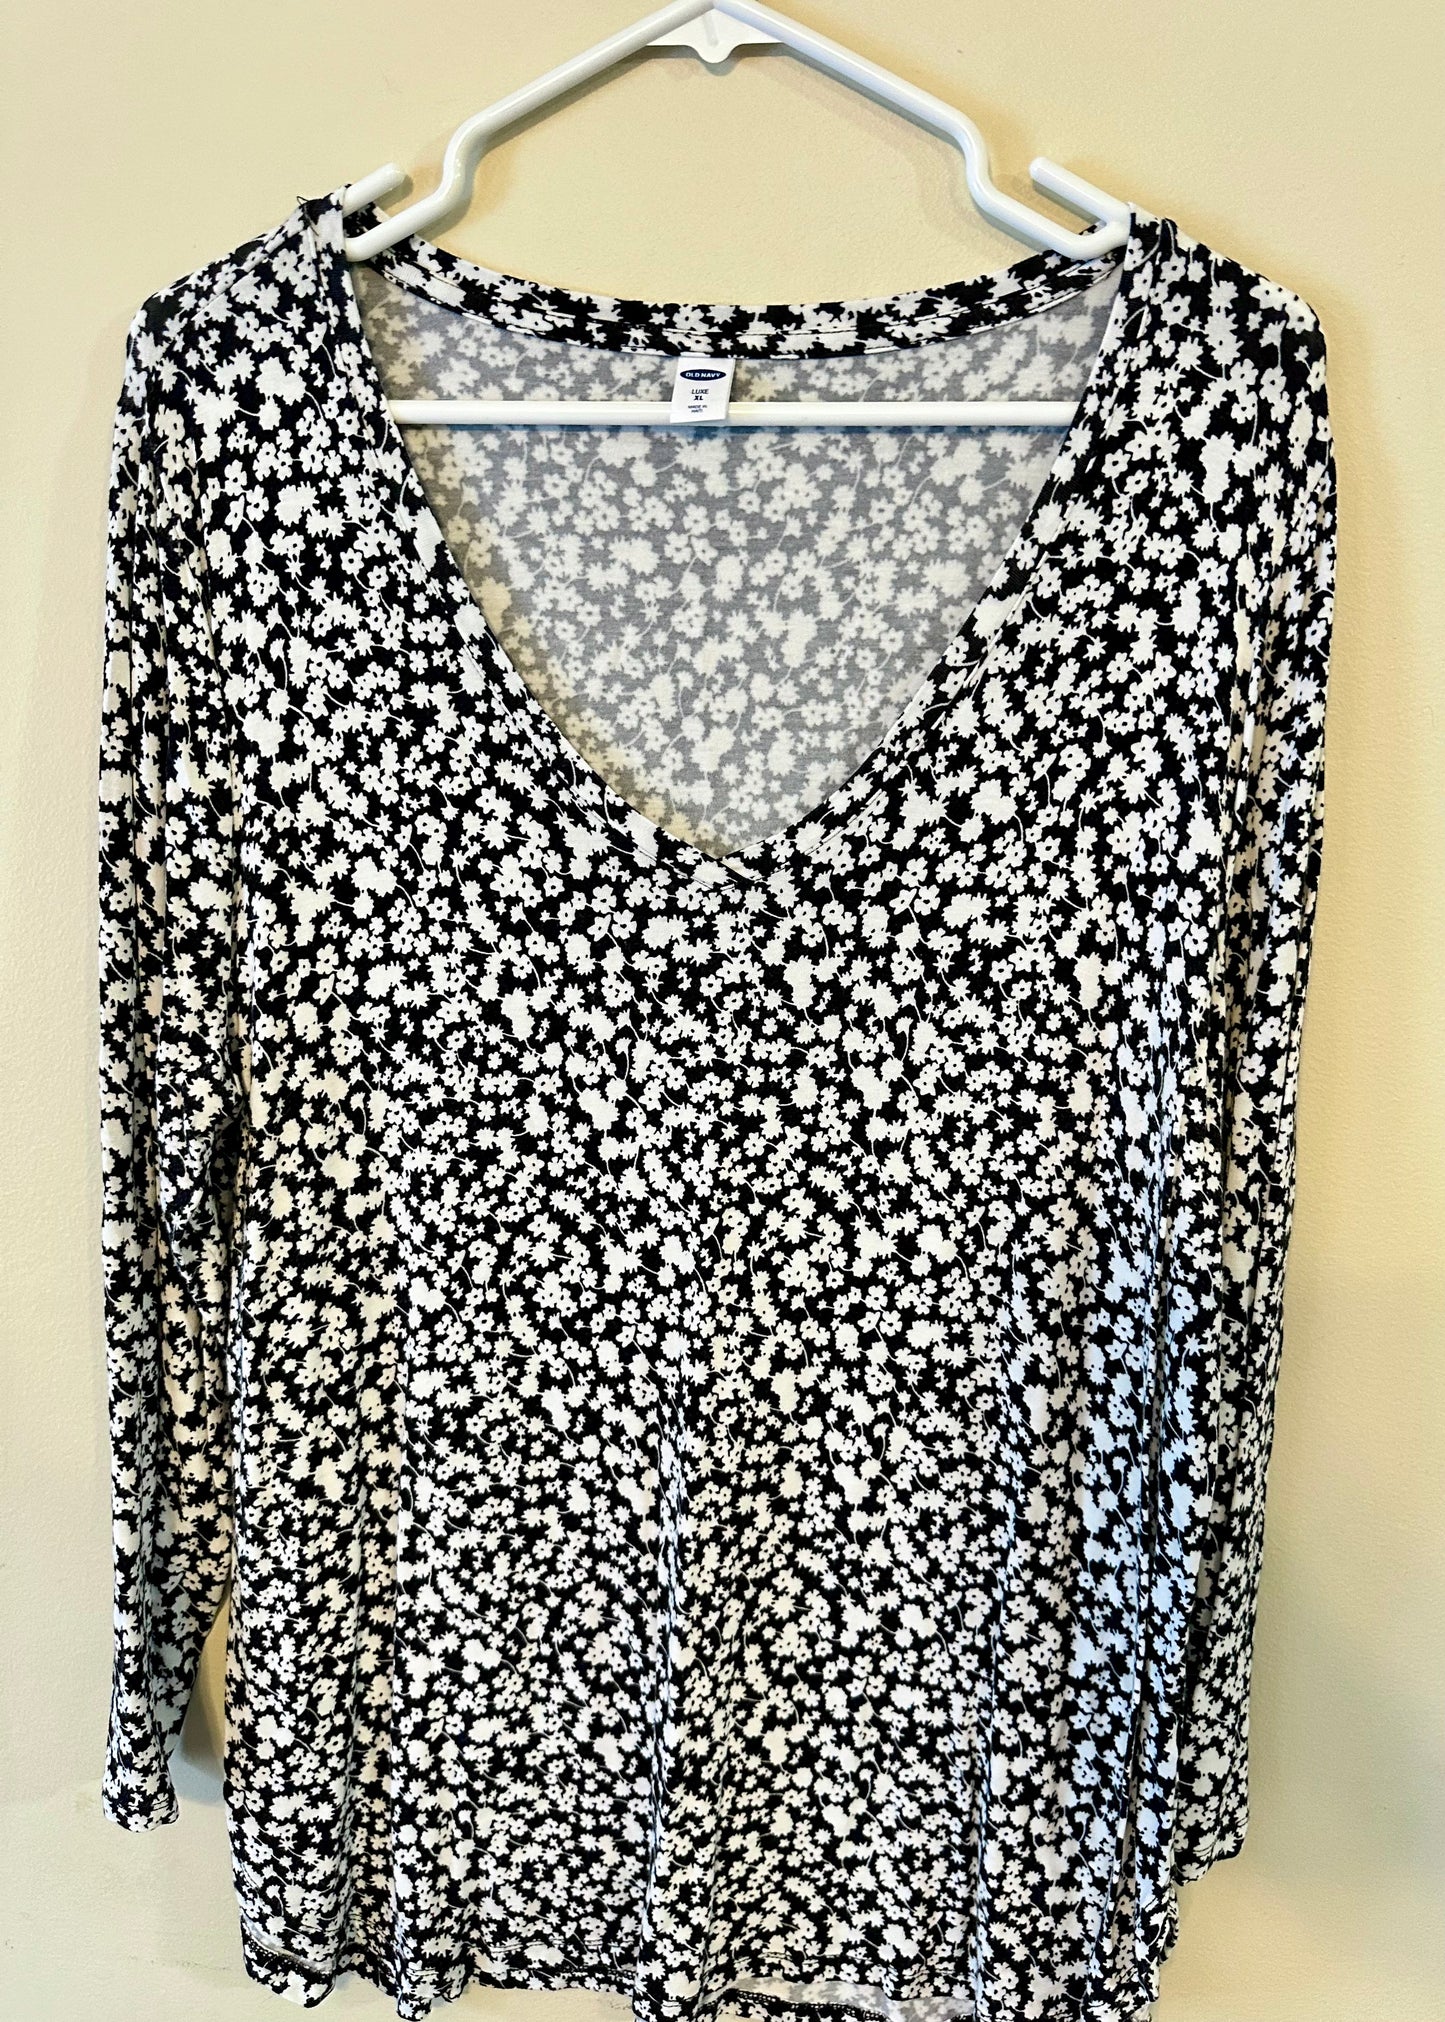 Old Navy women's black and white floral shirt long sleeve size XL